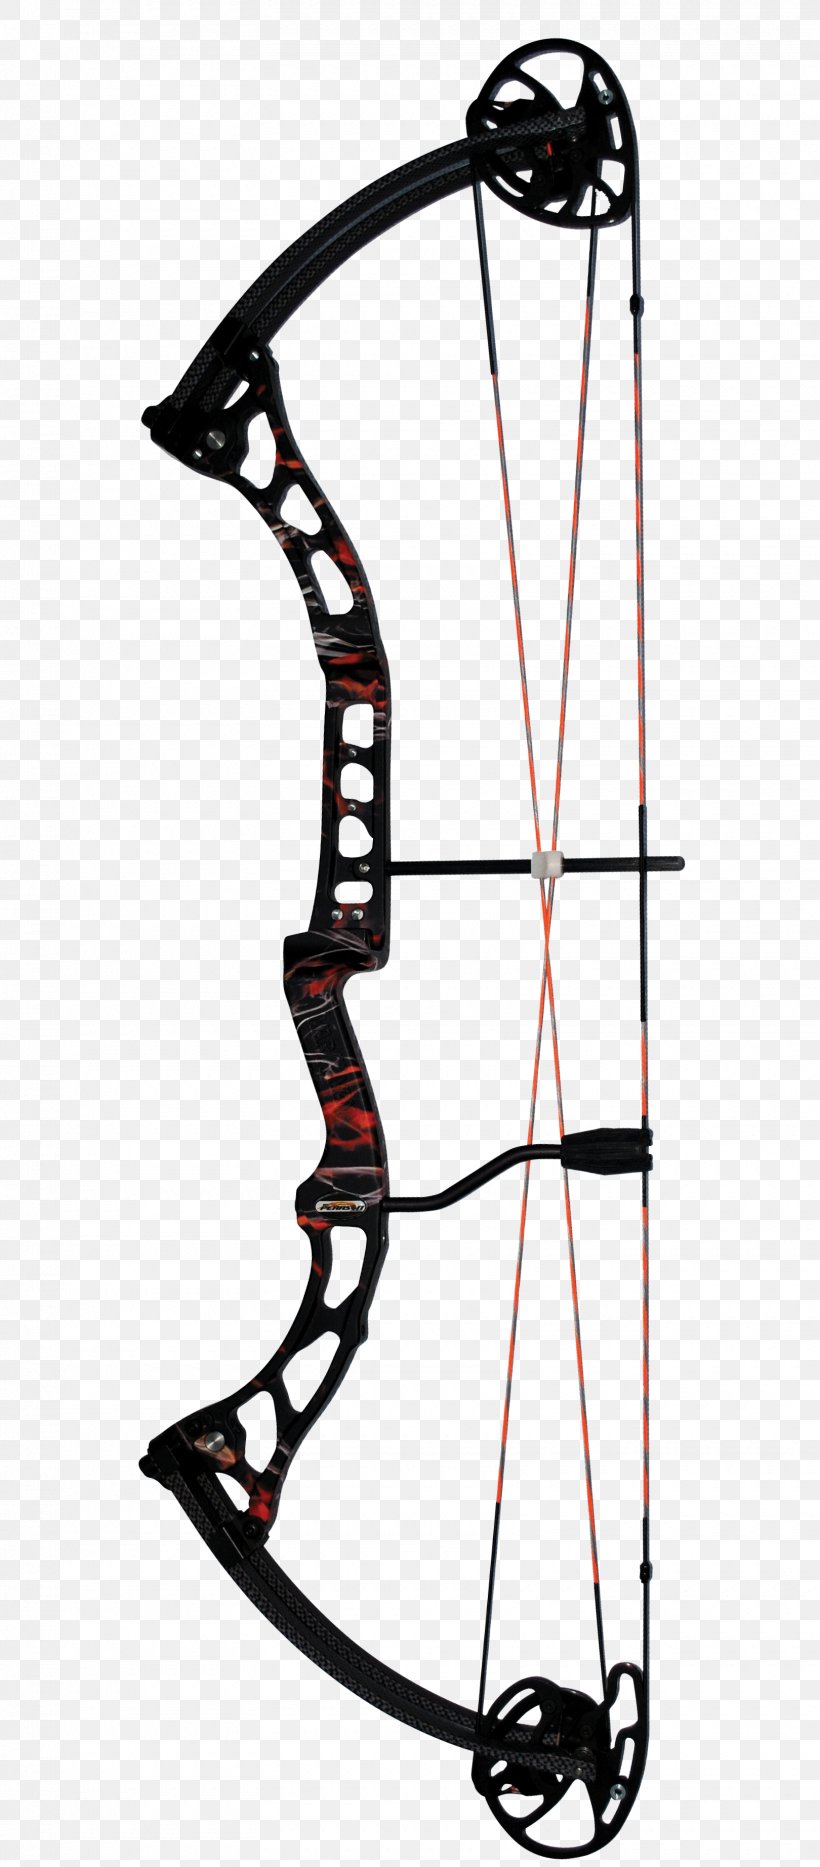 Compound Bows Bow And Arrow Archery, PNG, 1620x3690px, Compound Bows, Archery, Bow, Bow And Arrow, Bowhunting Download Free